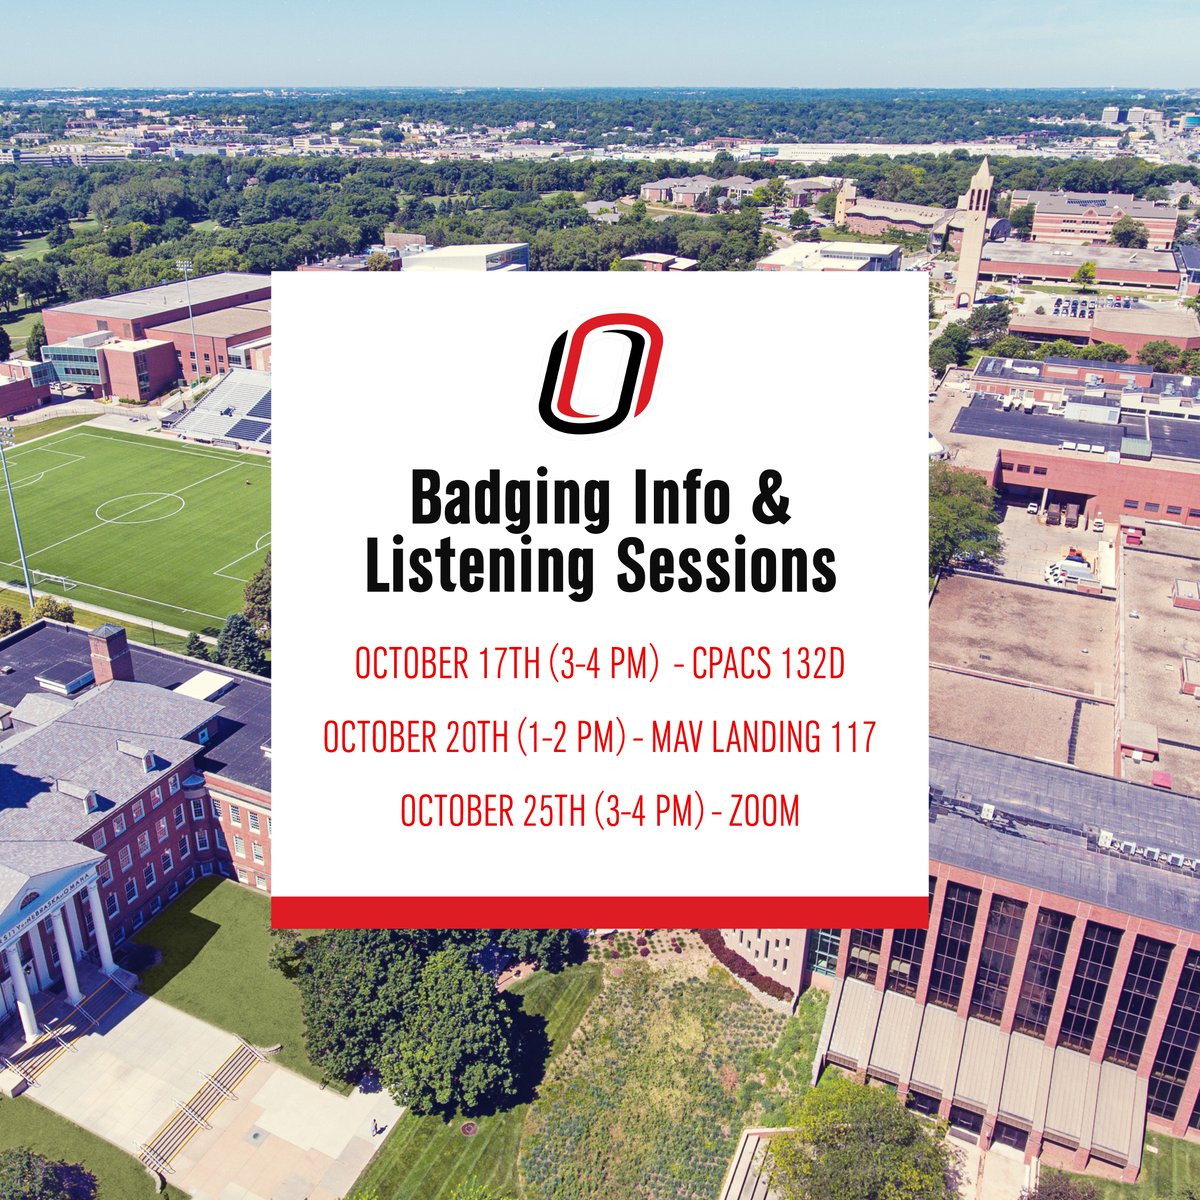 Join us to explore the world of digital badging! Discover how badges showcase skills and their impact on UNO campus. Share your thoughts and questions as we shape the future of badging at the University of Nebraska!

#UNOBadging #SkillsRecognition #ListeningSession